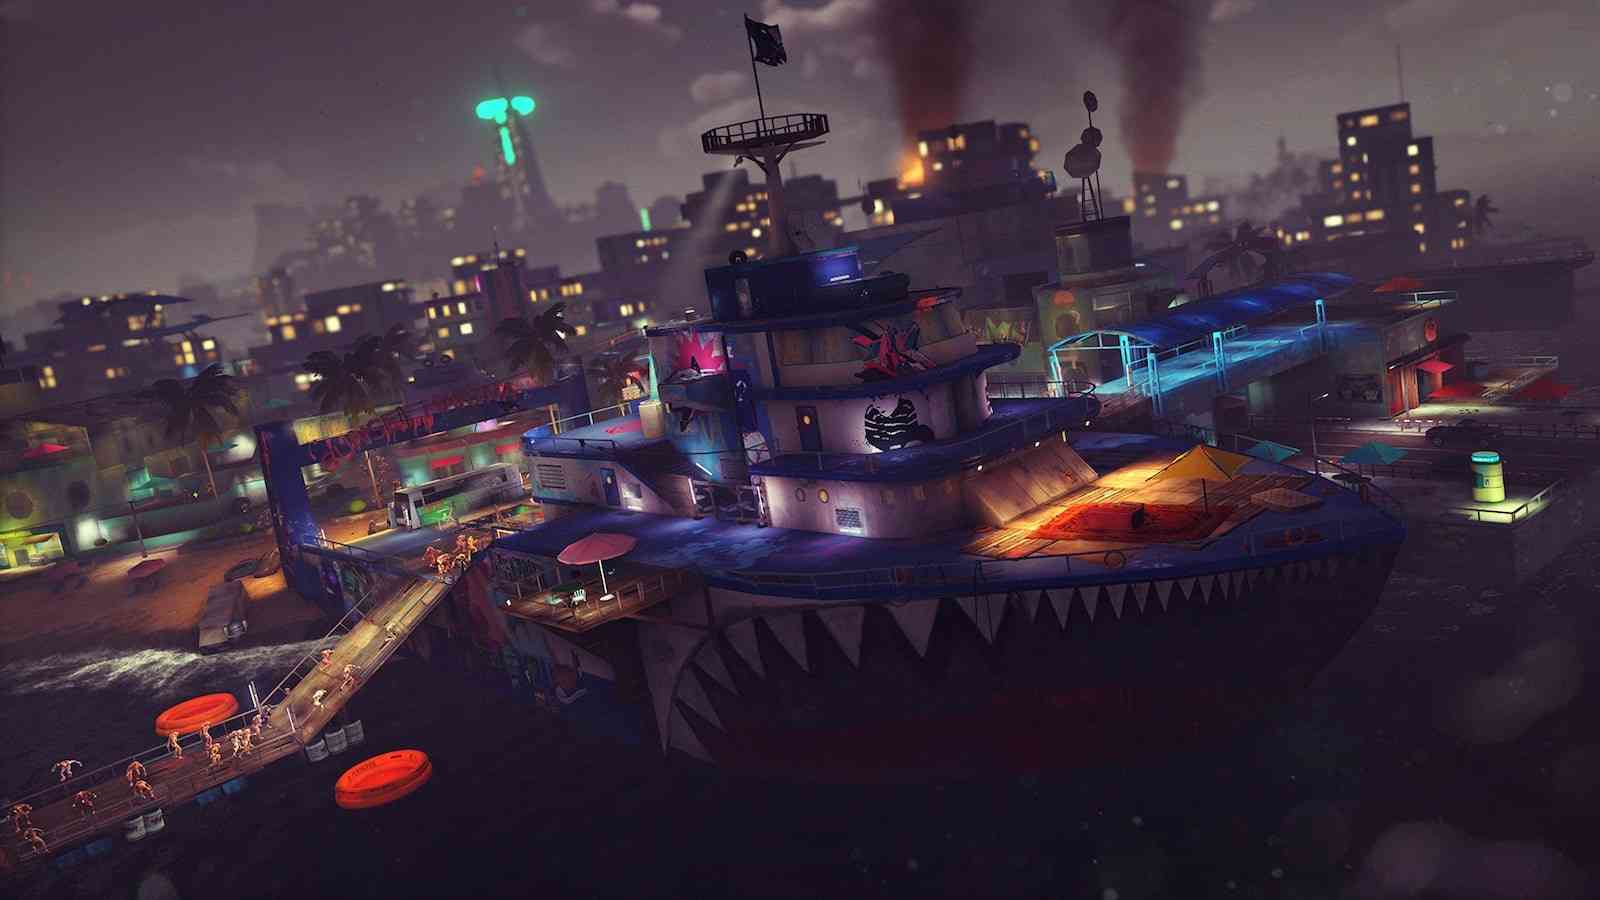 Is Sunset Overdrive Any Good?